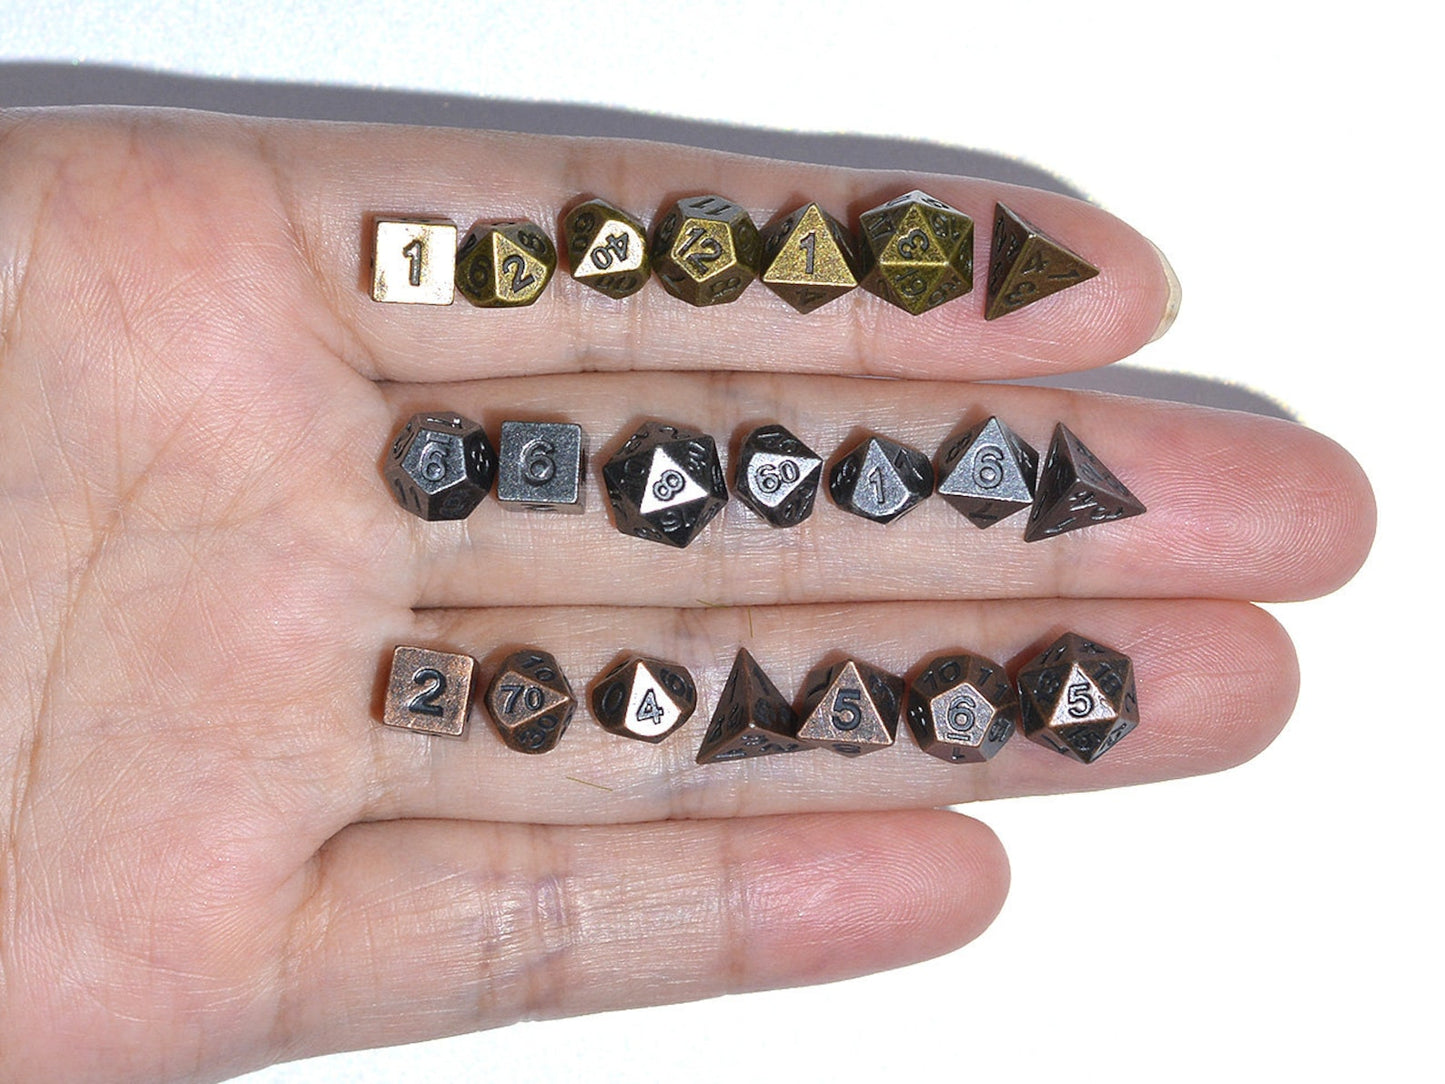 FREE Today: Metal Mini Archaized Board Game Dice Set  (Give away a random dice set)